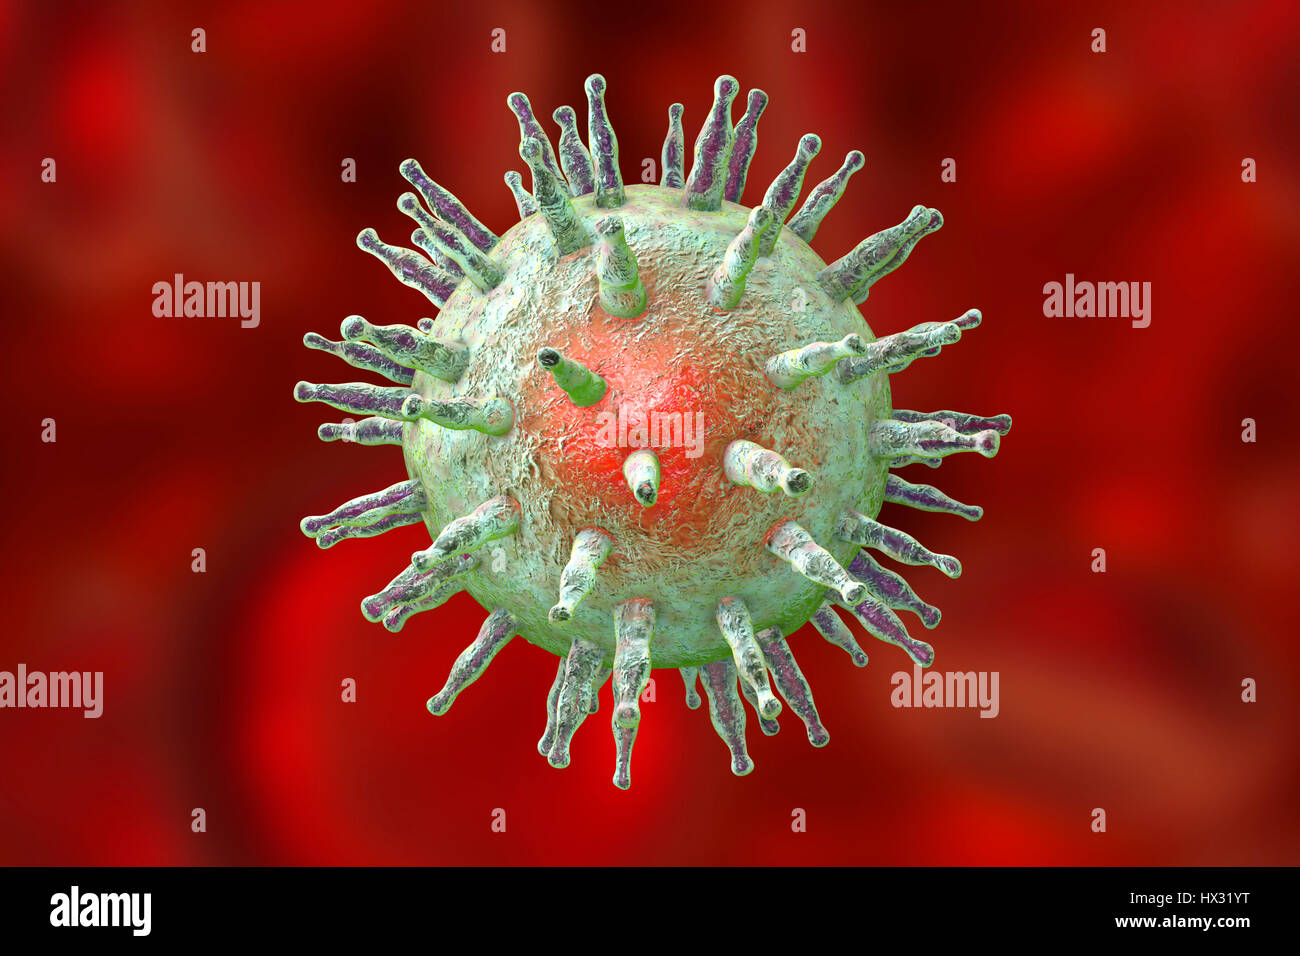 Epstein-Barr virus (EBV), computer illustration. EBV, also known as human herpes virus 4, is 1 of 8 herpes viruses that infects humans. It is best known as the cause of infectious mononucleosis (glandular fever), but is also associated with some forms of cancer, including Burkitt's lymphoma. In both infections, the virus infects one type of white blood cell, B lymphocytes. Infection with EBV is common and usually harmless; additional factors potentiate the development of more serious diseases. Stock Photo